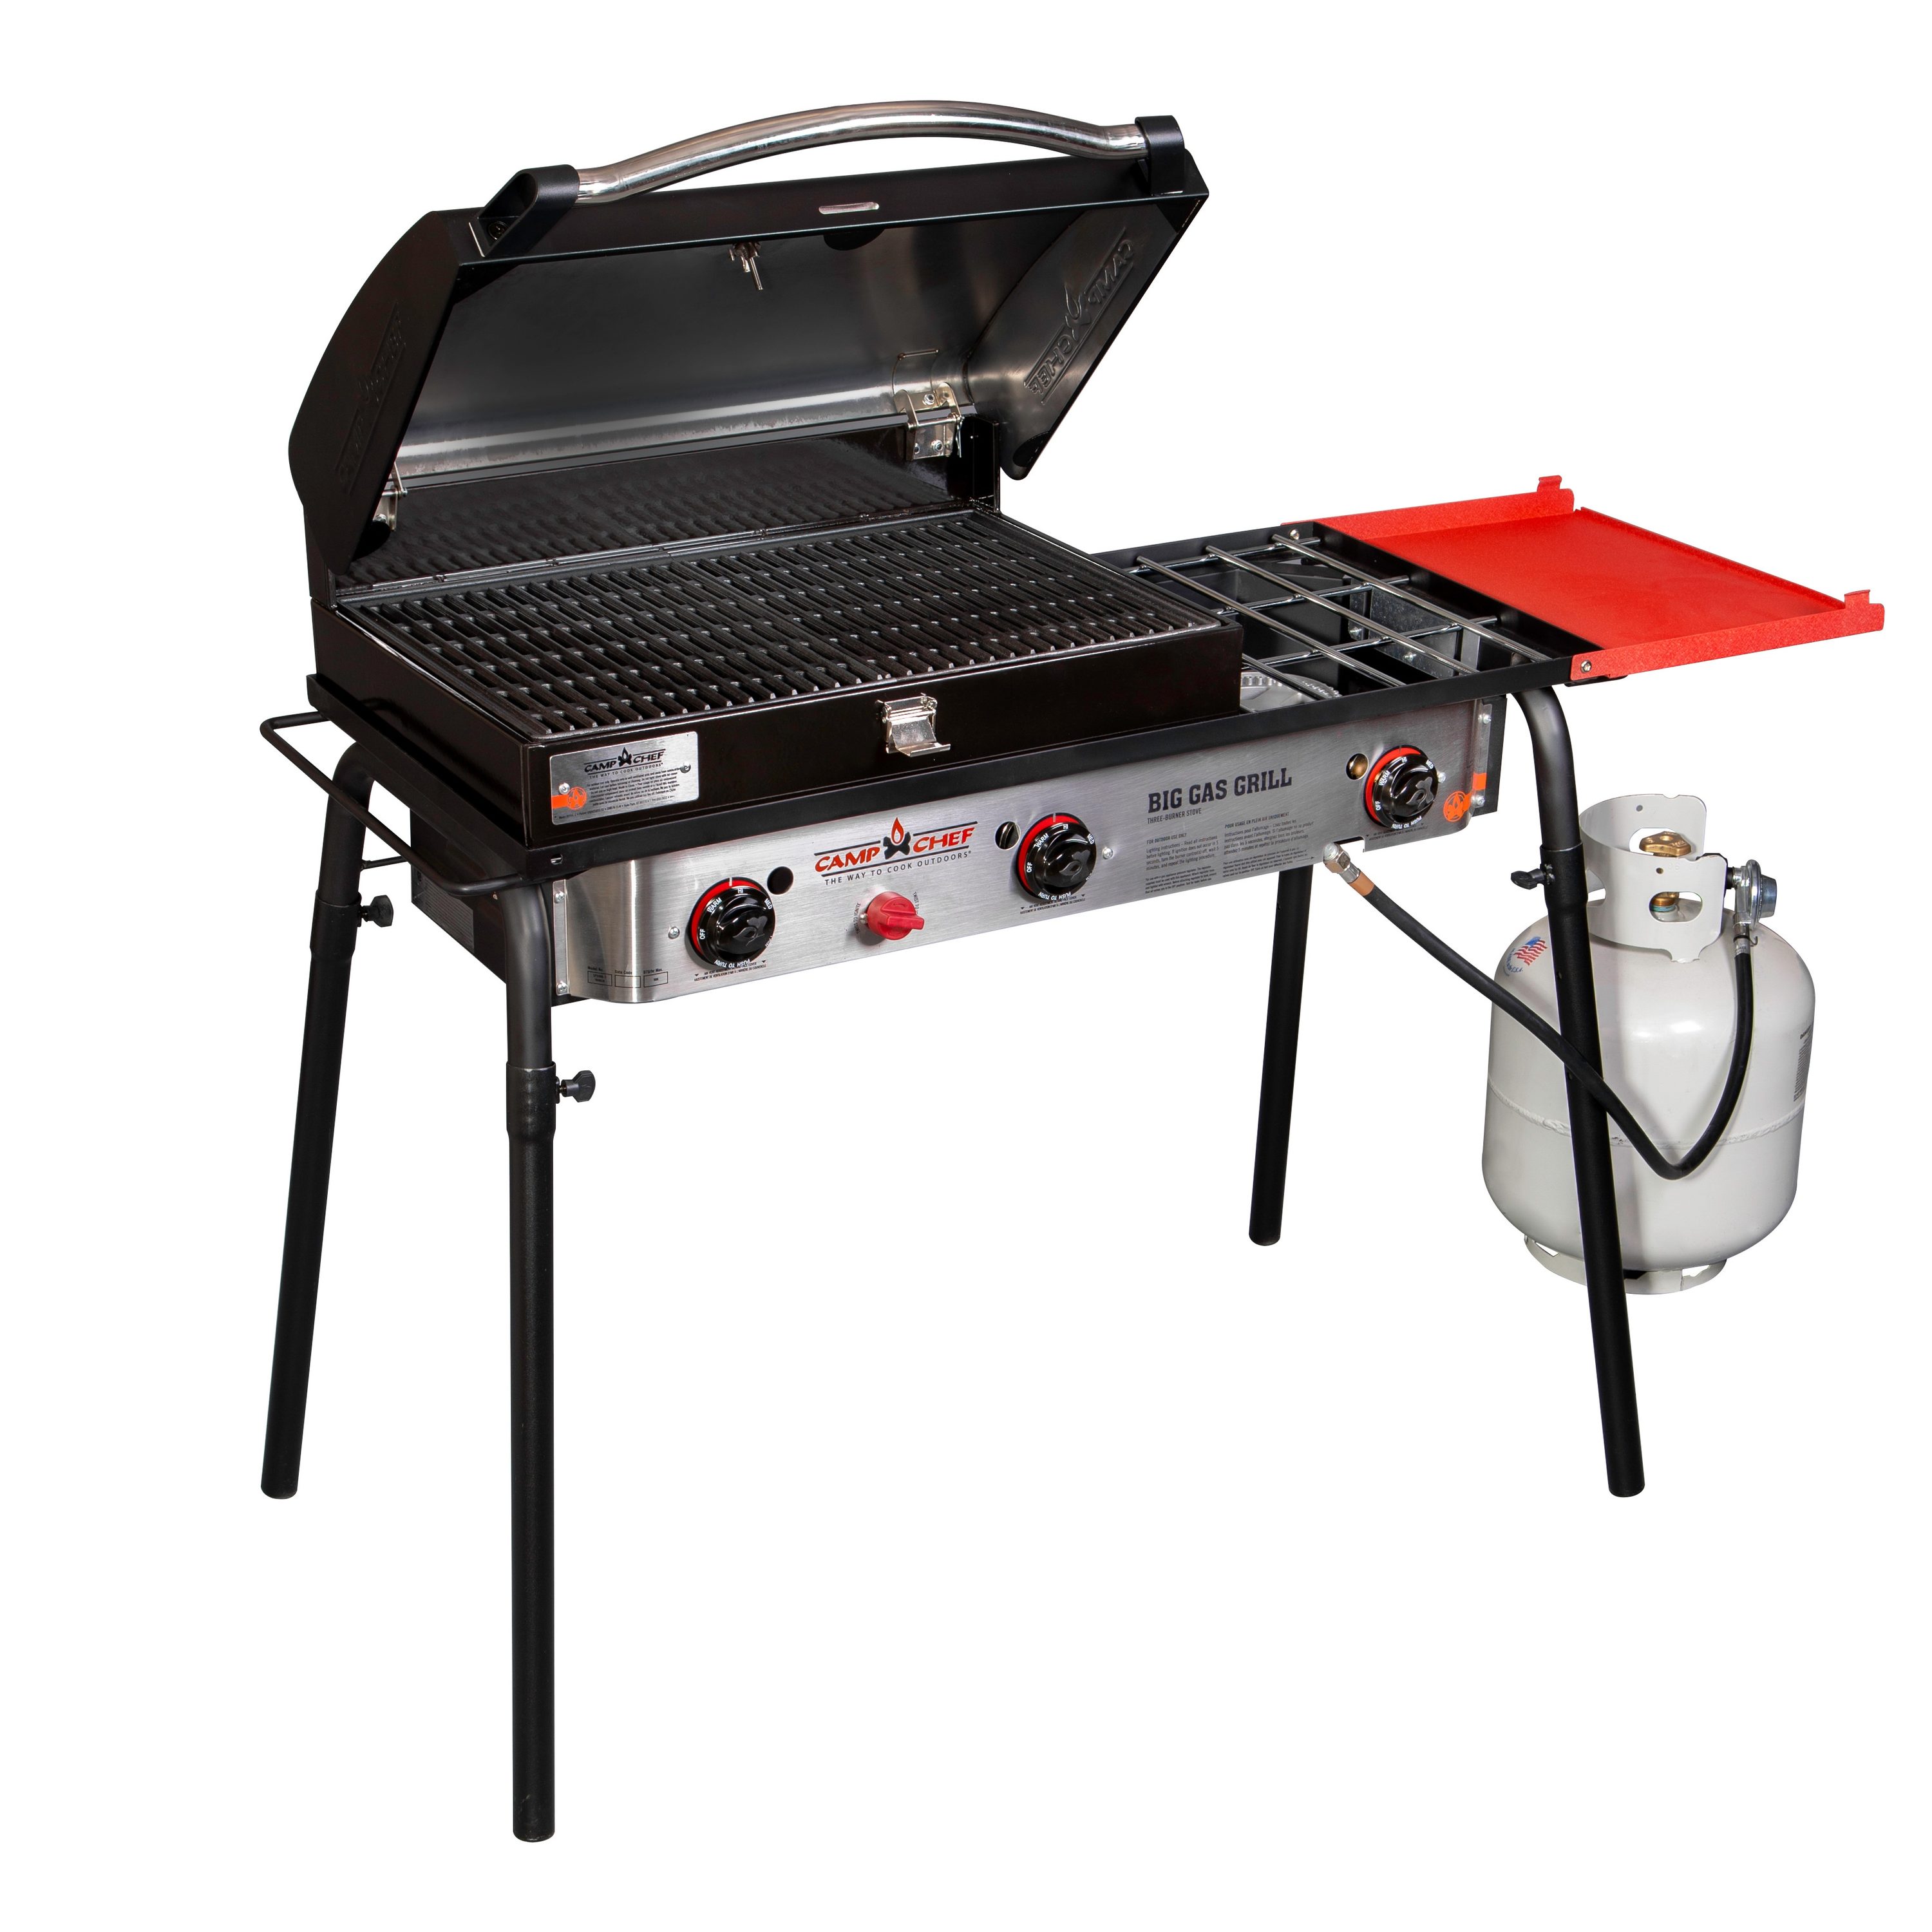 ven Sved Se internettet Camp Chef Big Gas Grill 3-Burners Propane Electronic Aluminized Steel  Outdoor Stove in the Outdoor Burners & Stoves department at Lowes.com